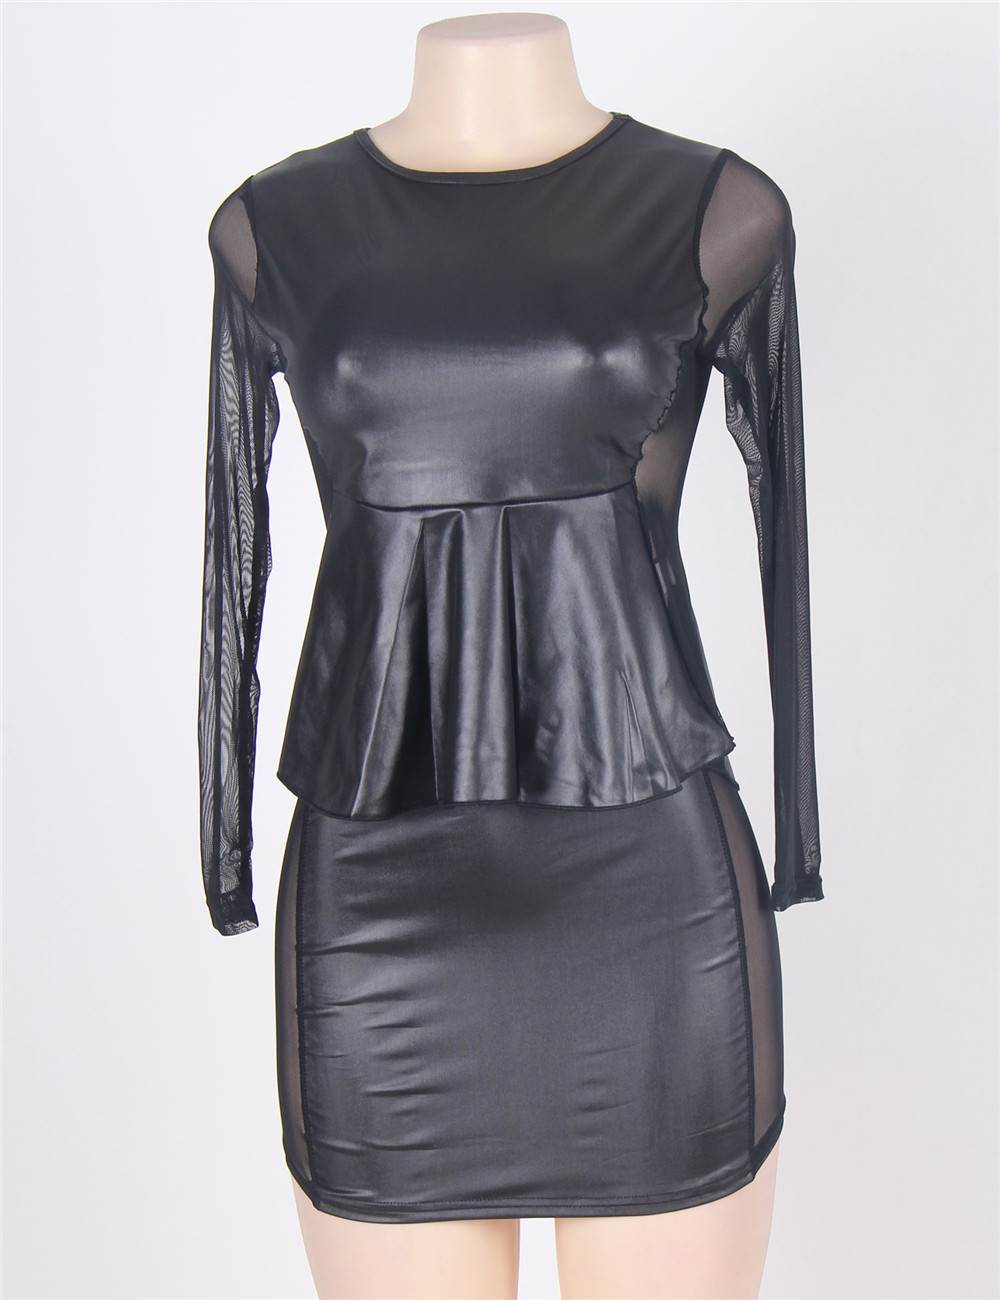 In Stock Black Leather Mesh Inset Peplum Top and Skirt